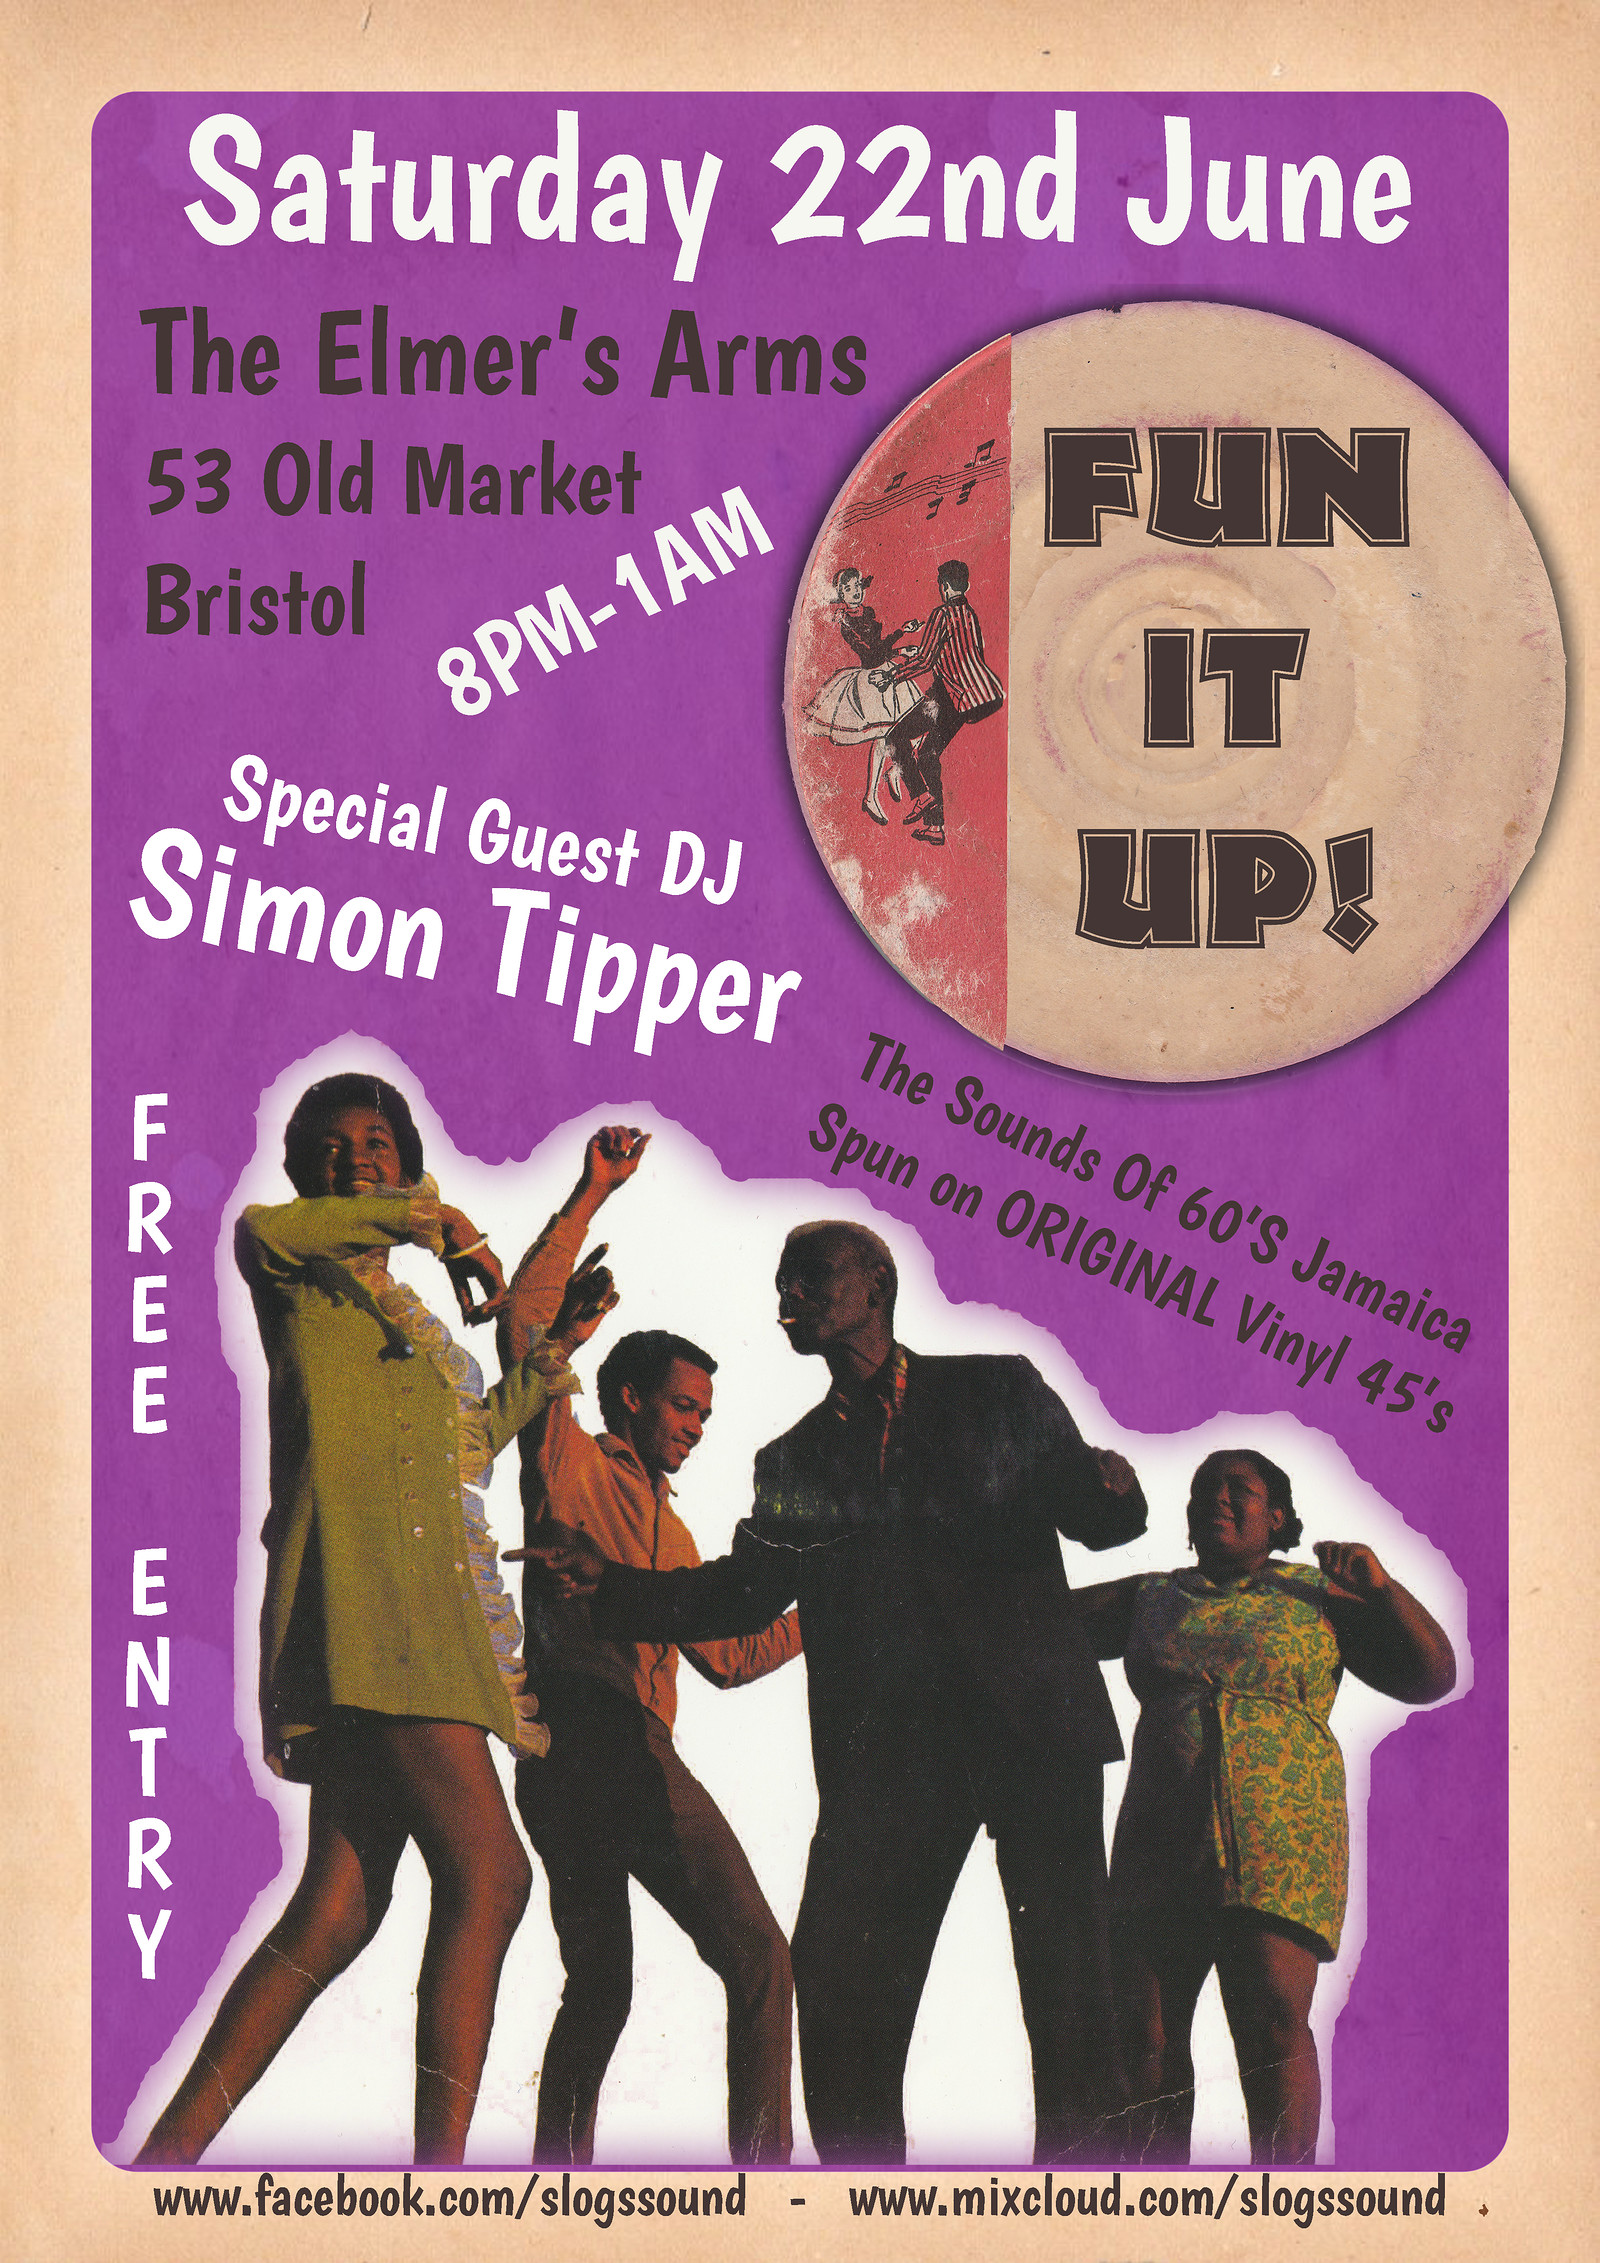 Fun It Up 22/06/19 Special Guest DJ: Simon Tipper at The Elmer's Arms